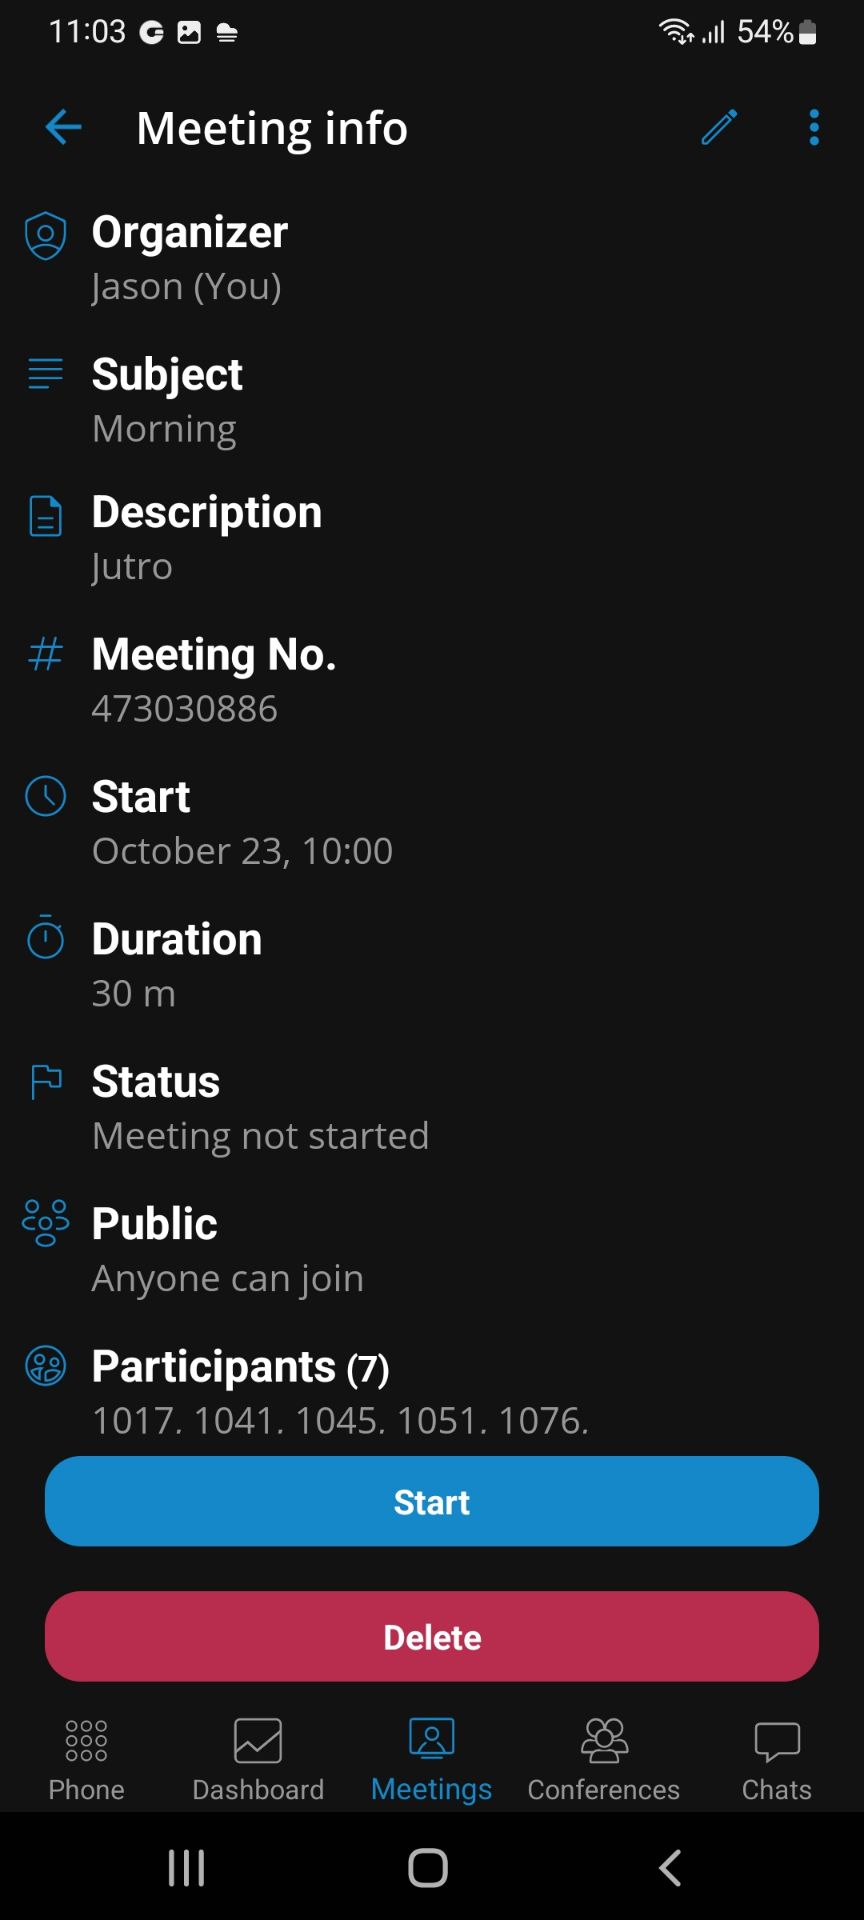 android-meeting-info-options-1.jpg